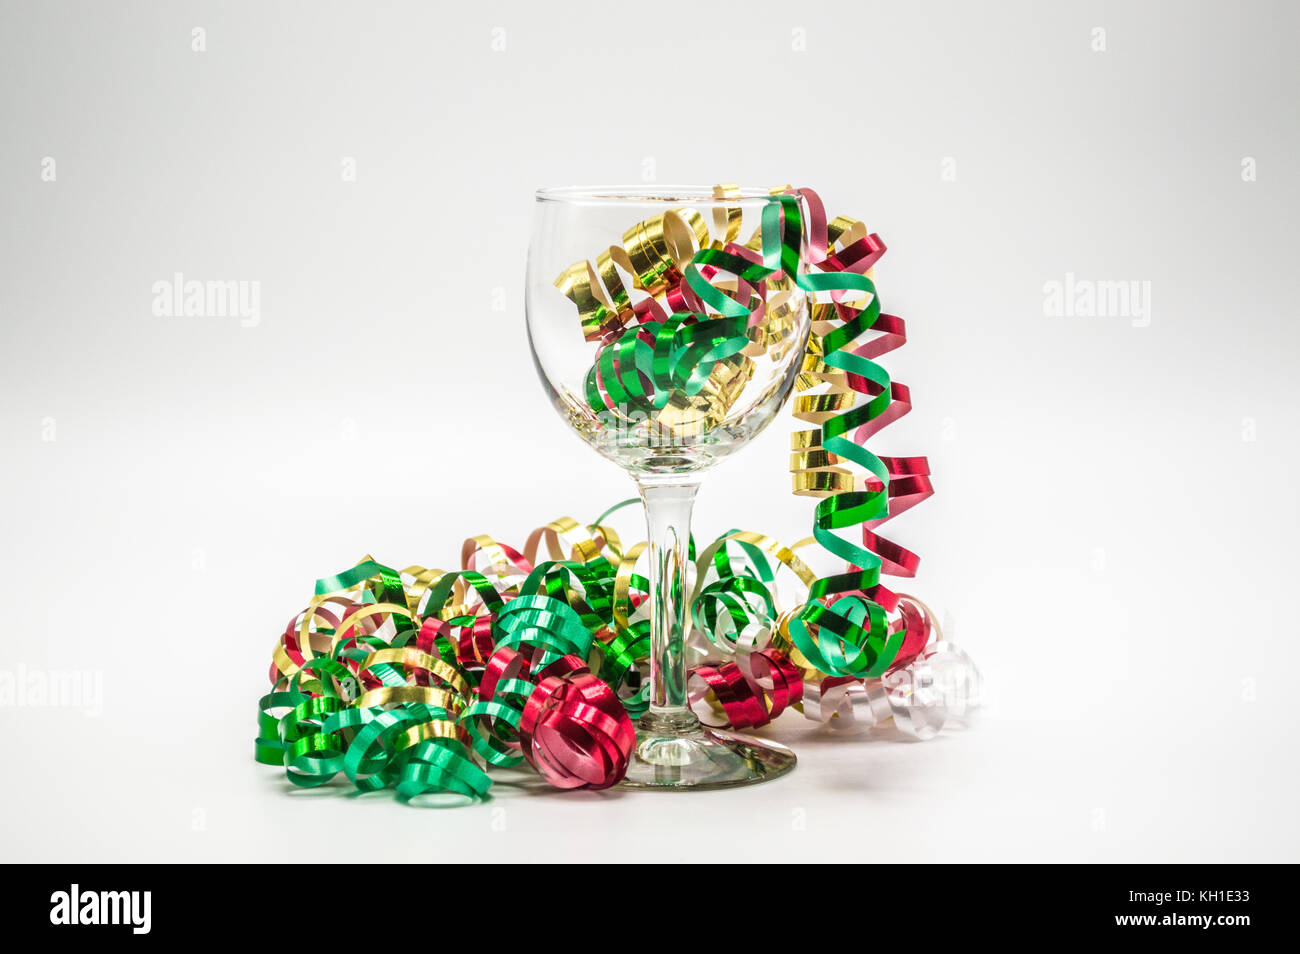 wine glass with colorful Christmas curling ribbon streaming out of it isolated on a plain background Stock Photo